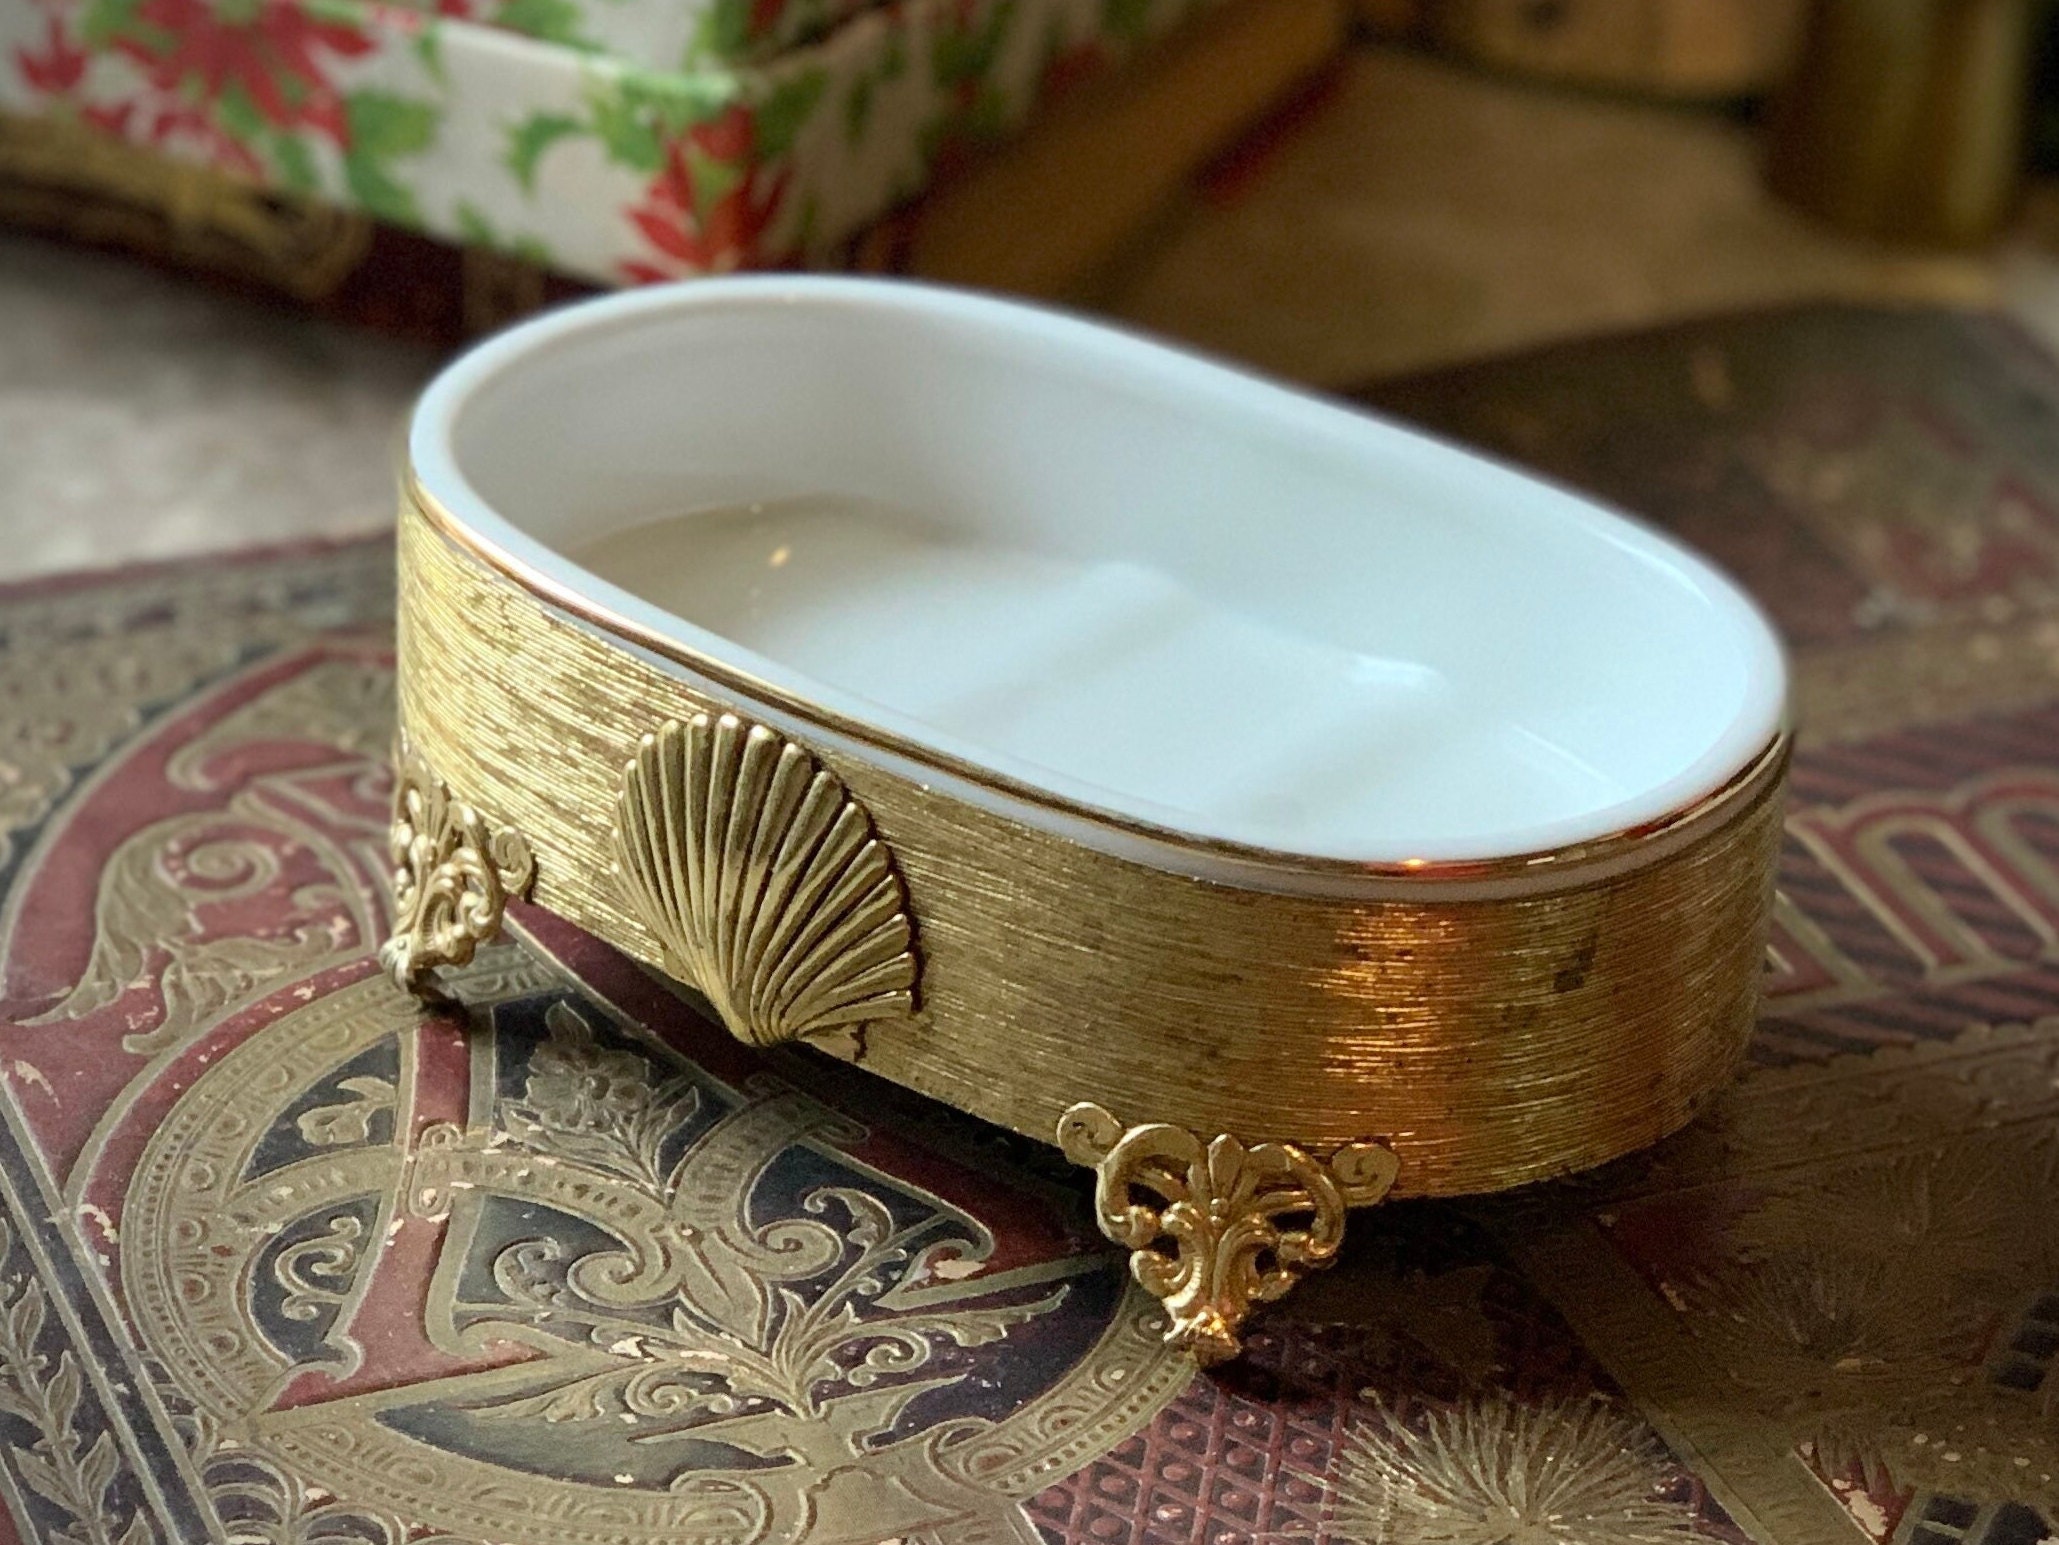 Vintage Soap Dish Holder Retro Porcelain Stylebuilt Gold Tone Metal Footed  Shell Bathroom Display Tray 5.75 Inch Long 